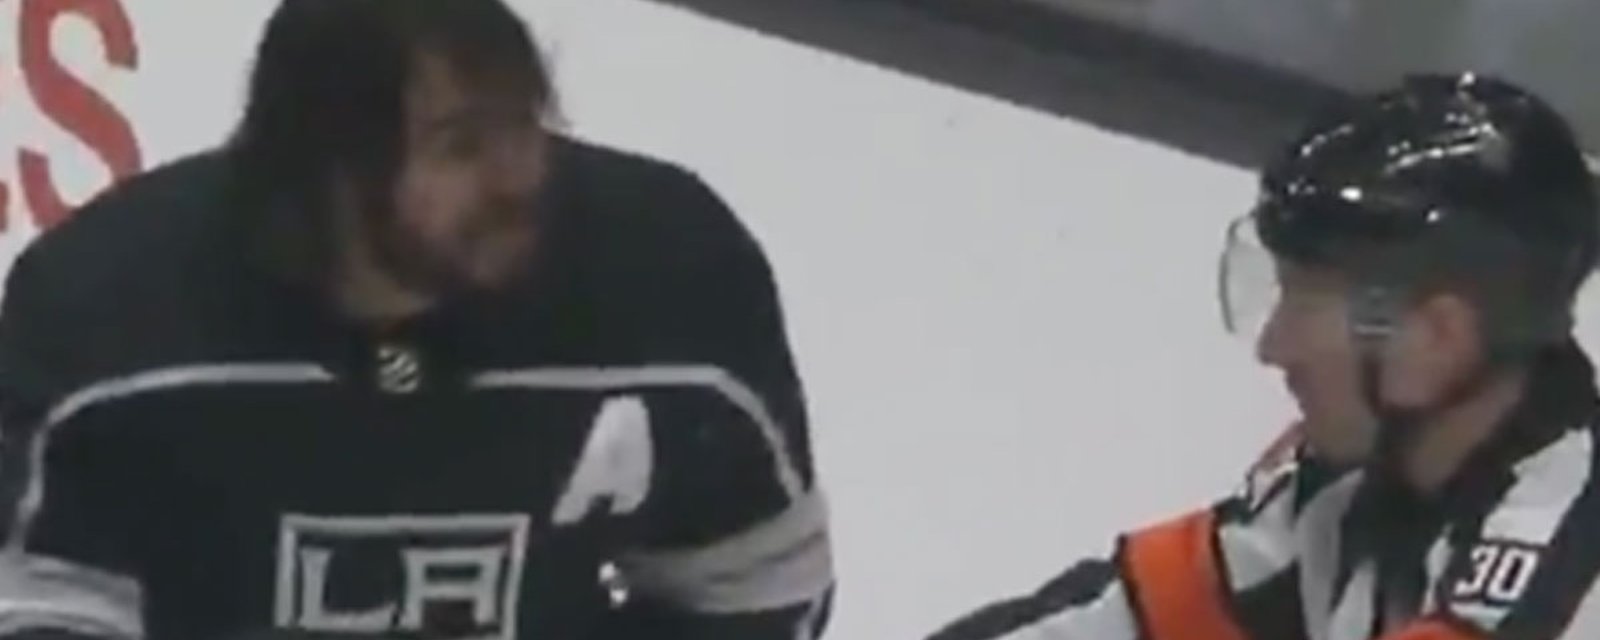 Doughty complains to referee about holding call in funniest mic'd up segment you'll see! 